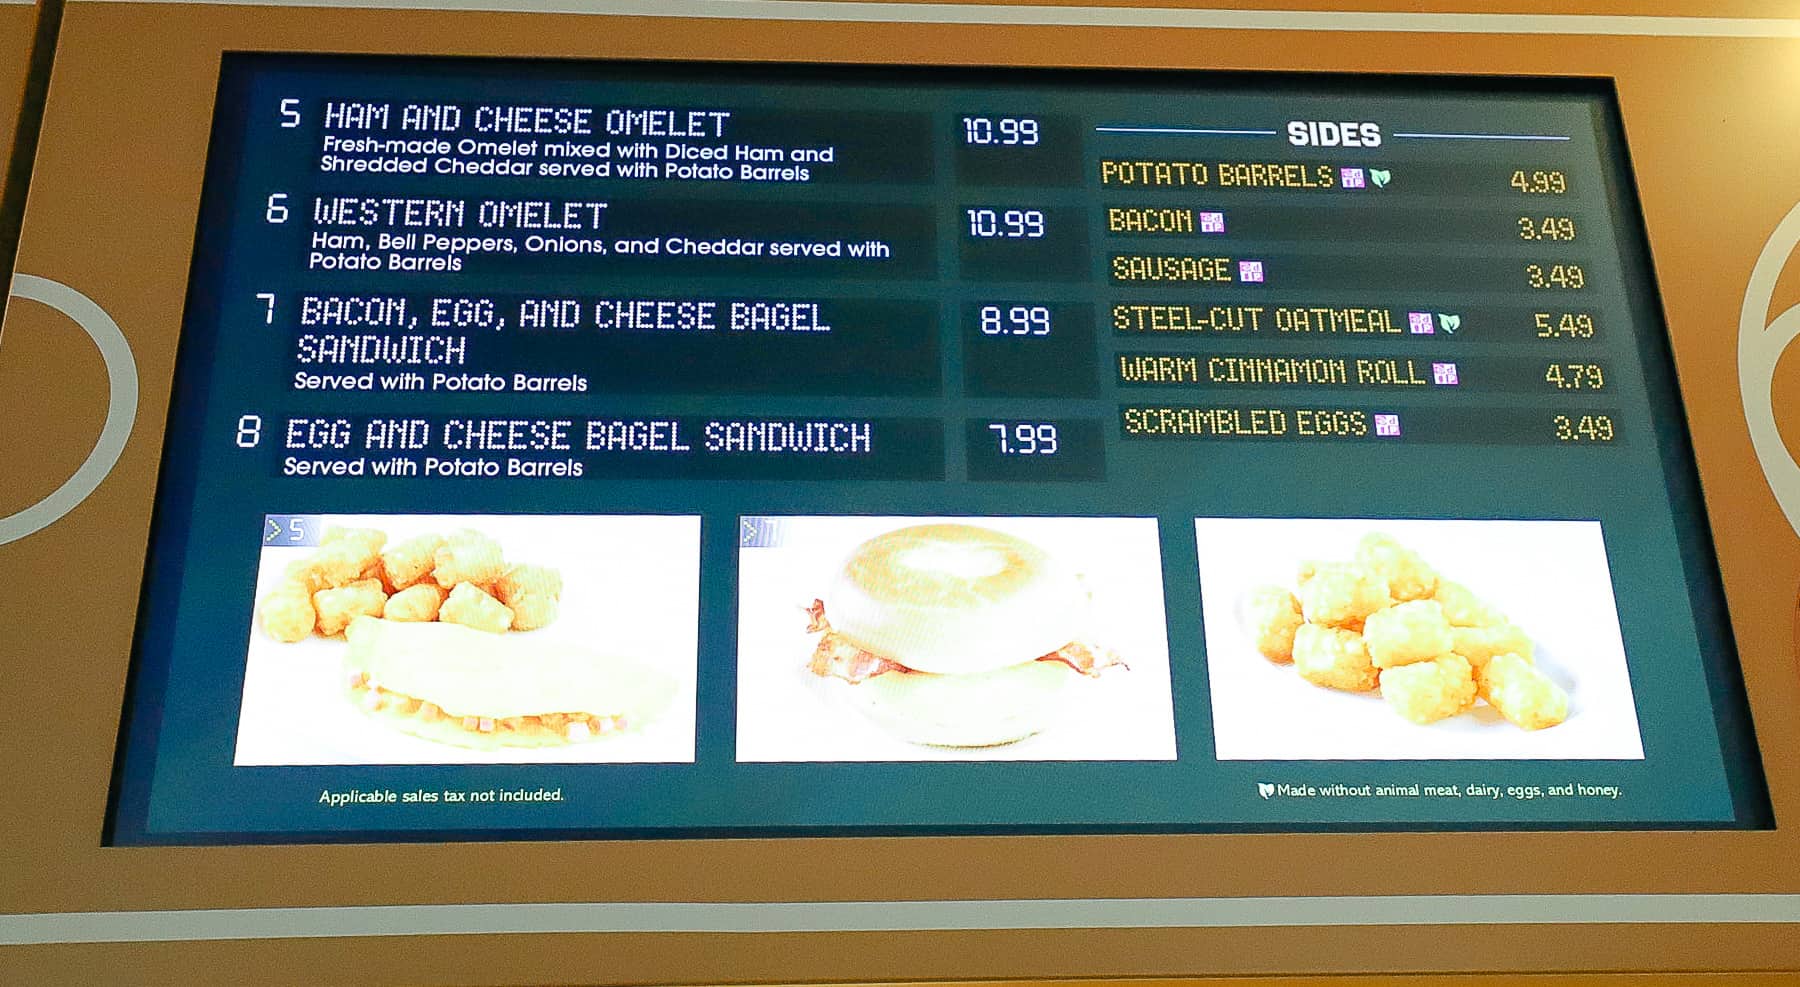 Menu Board End Zone Food Court with items containing eggs